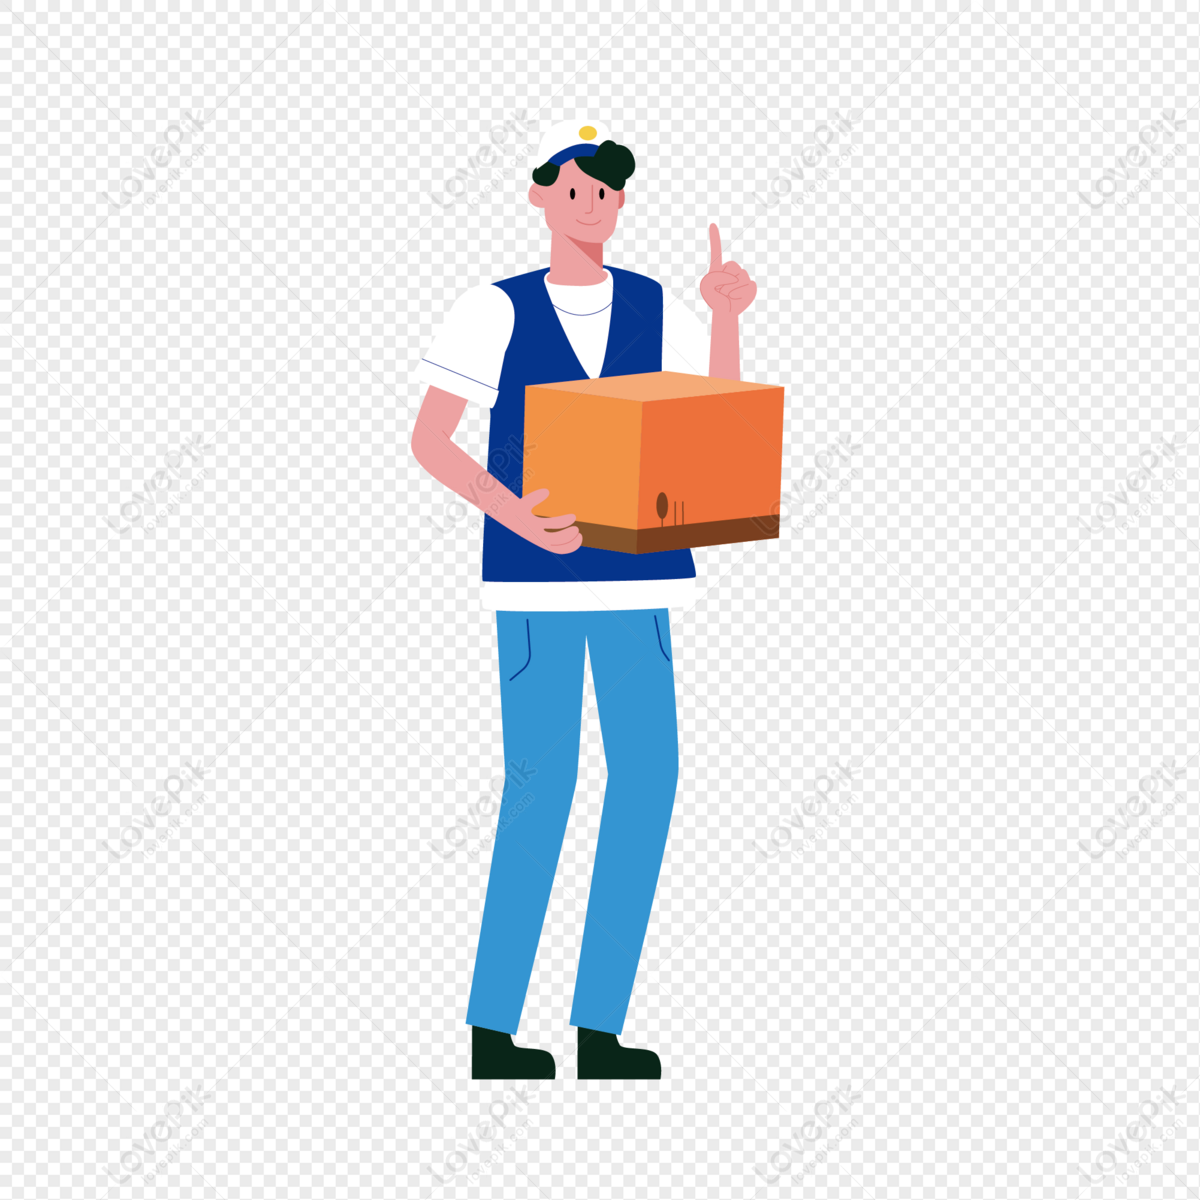 Delivery Boy PNG Hd Transparent Image And Clipart Image For Free Download -  Lovepik | 401708524